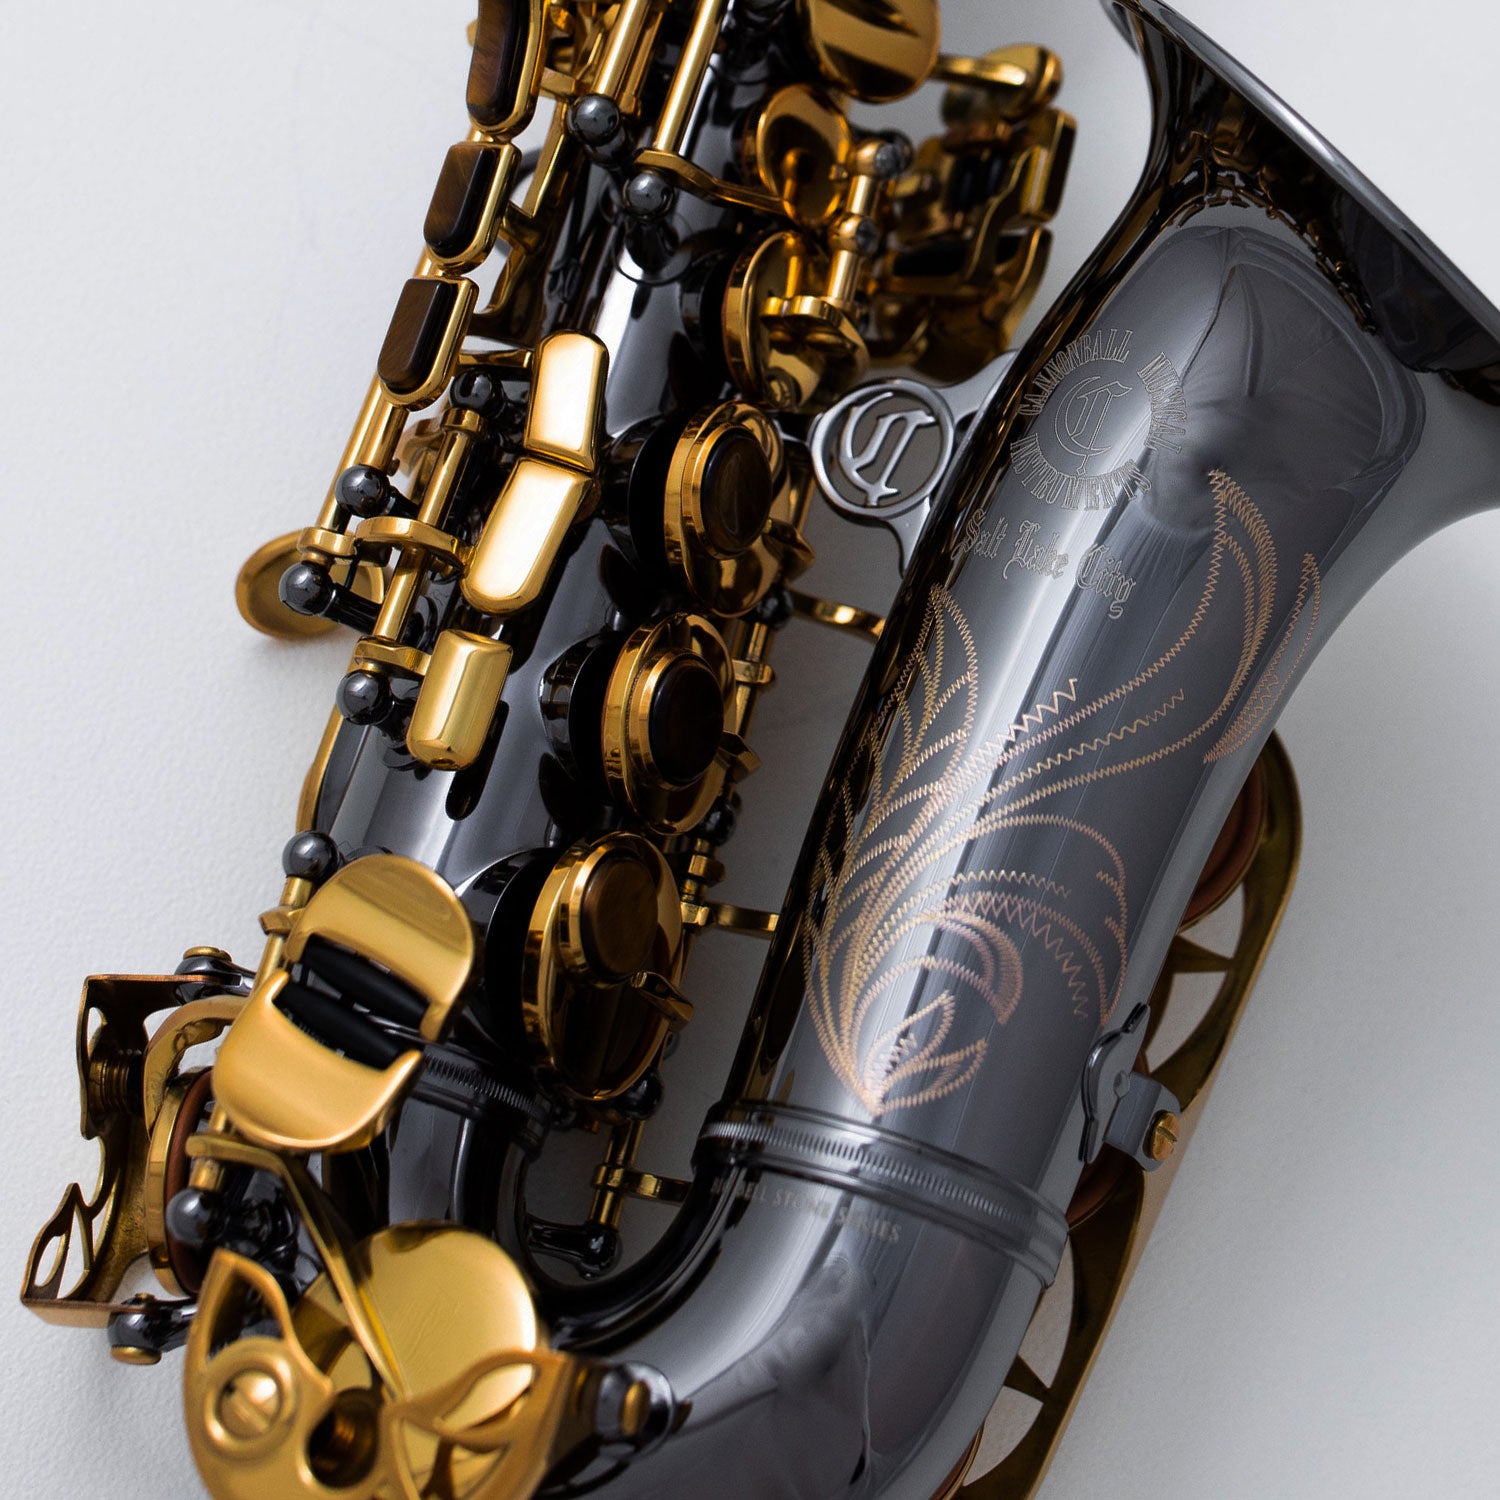 Cannonball Big Bell® Stone Series® Premium T5 Bb Tenor Saxophone (assorted finishes)